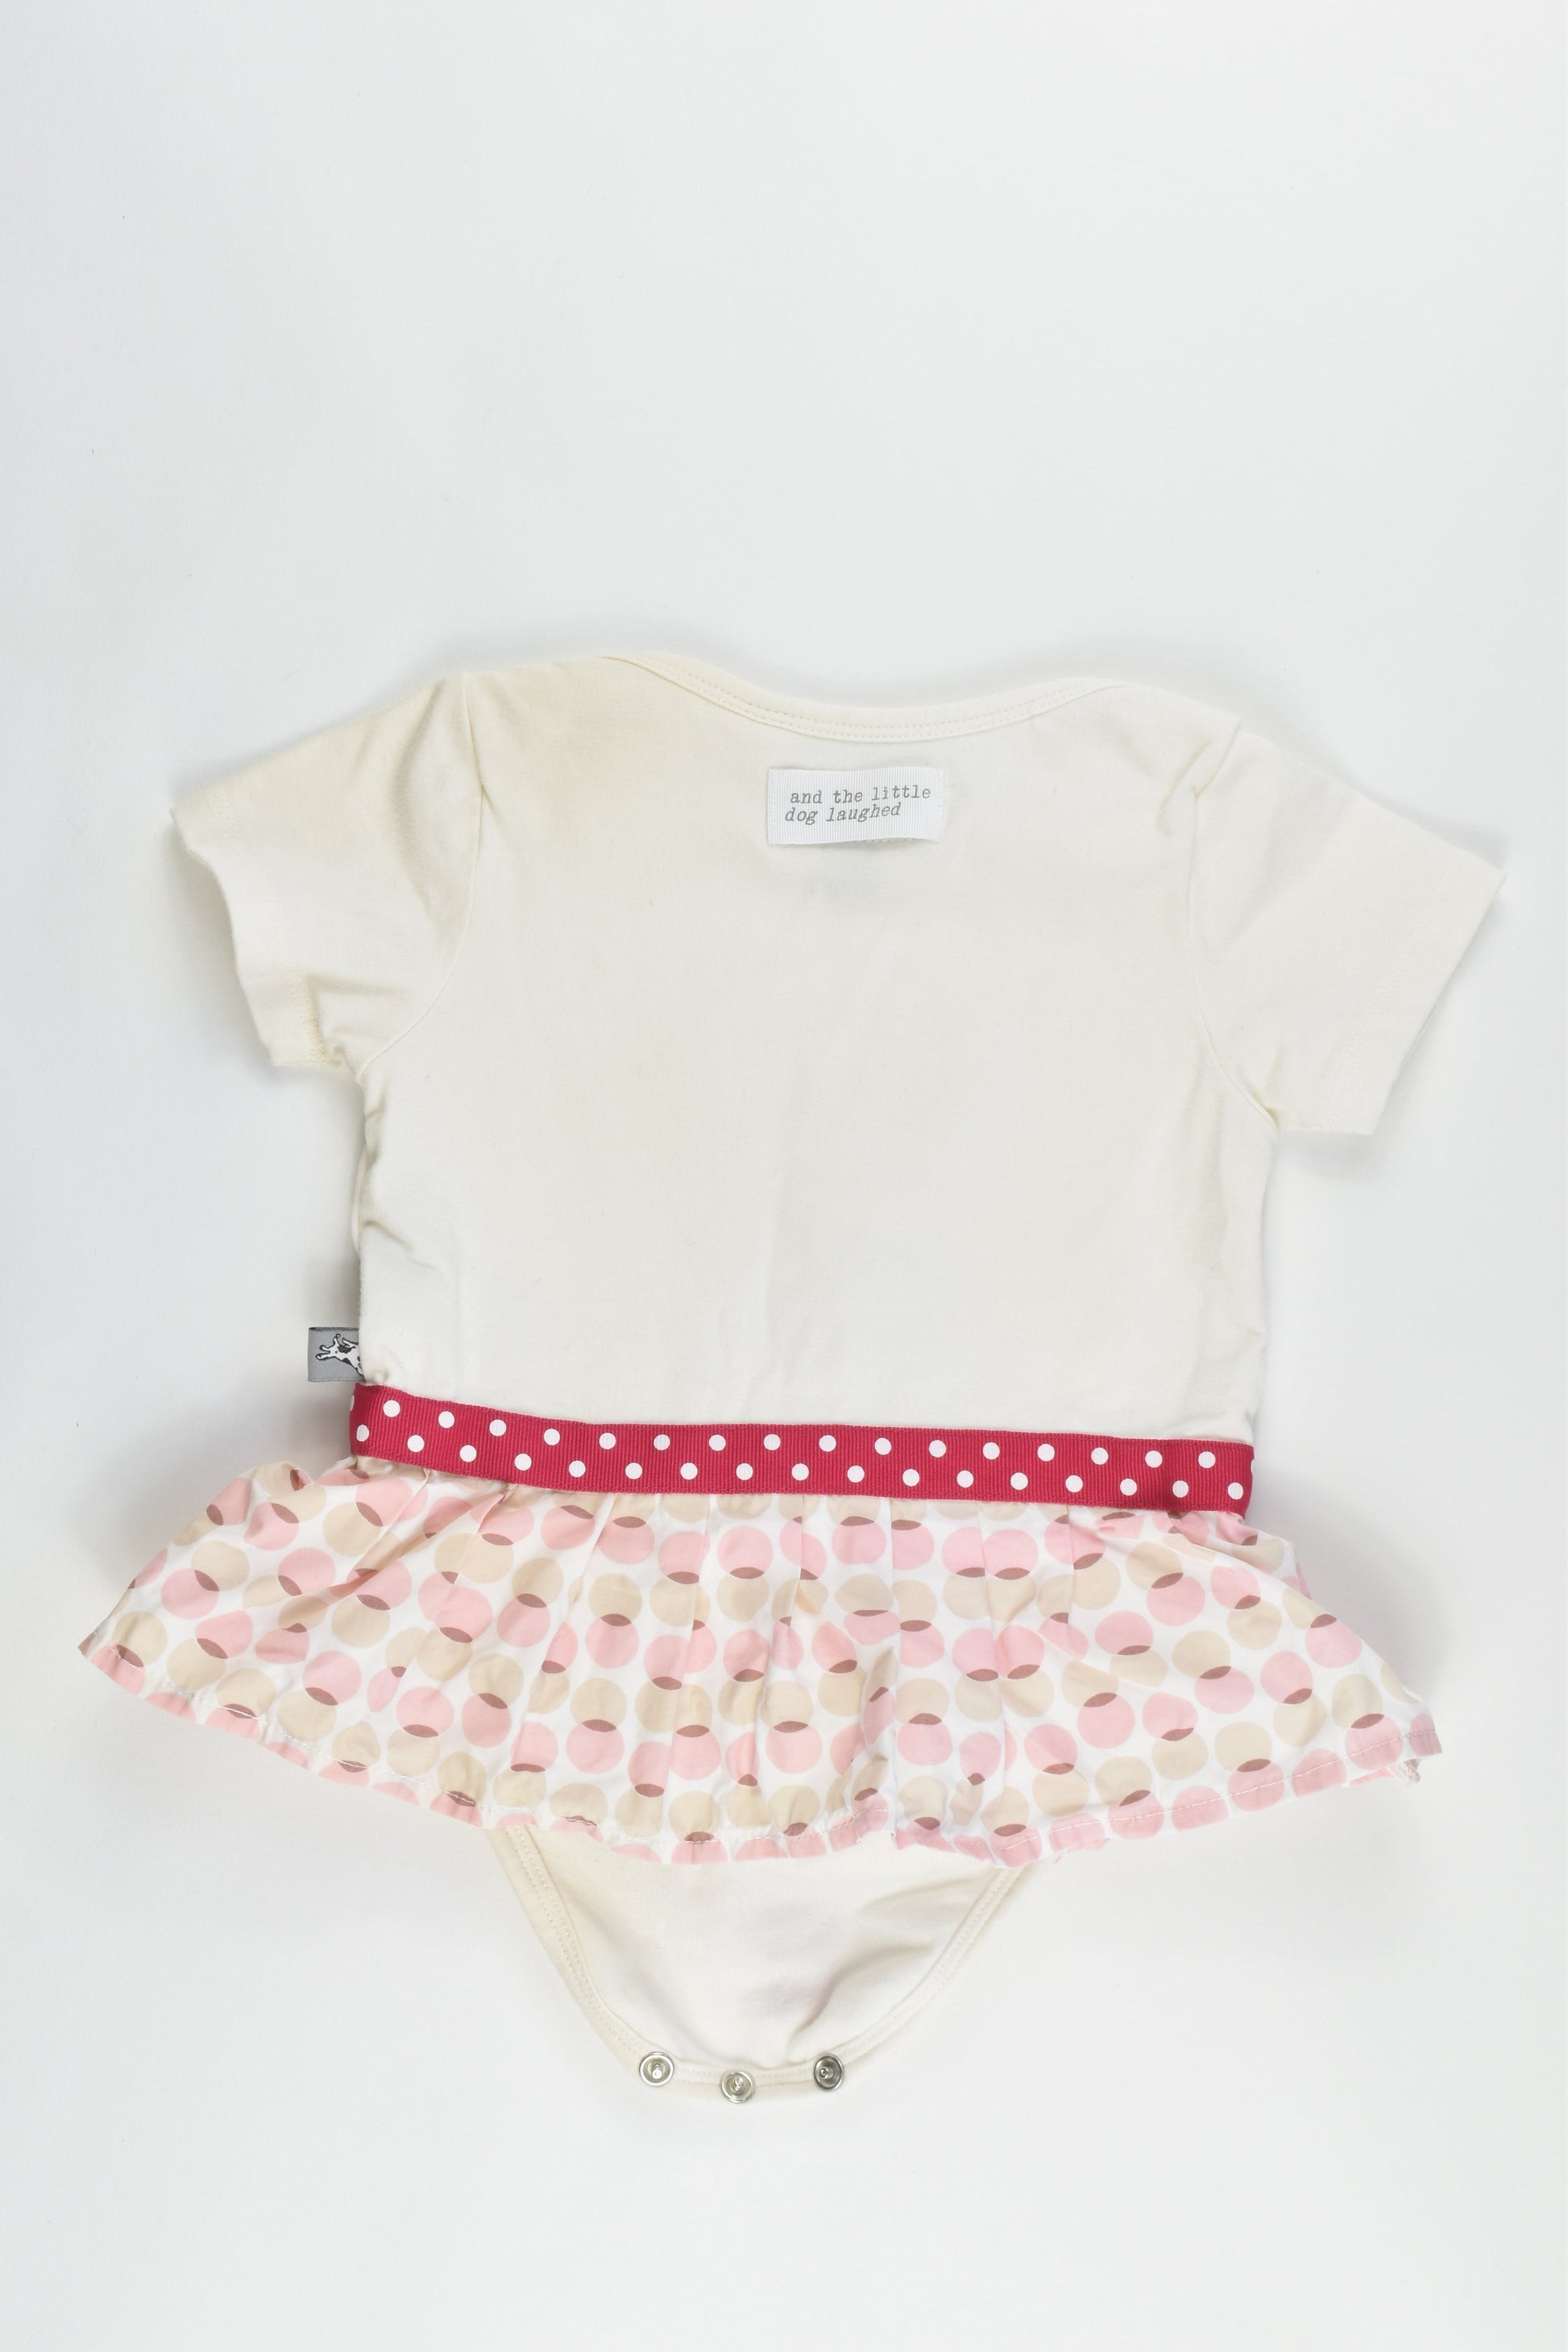 And The Little Dog Laughed Size 3-6 months Romper